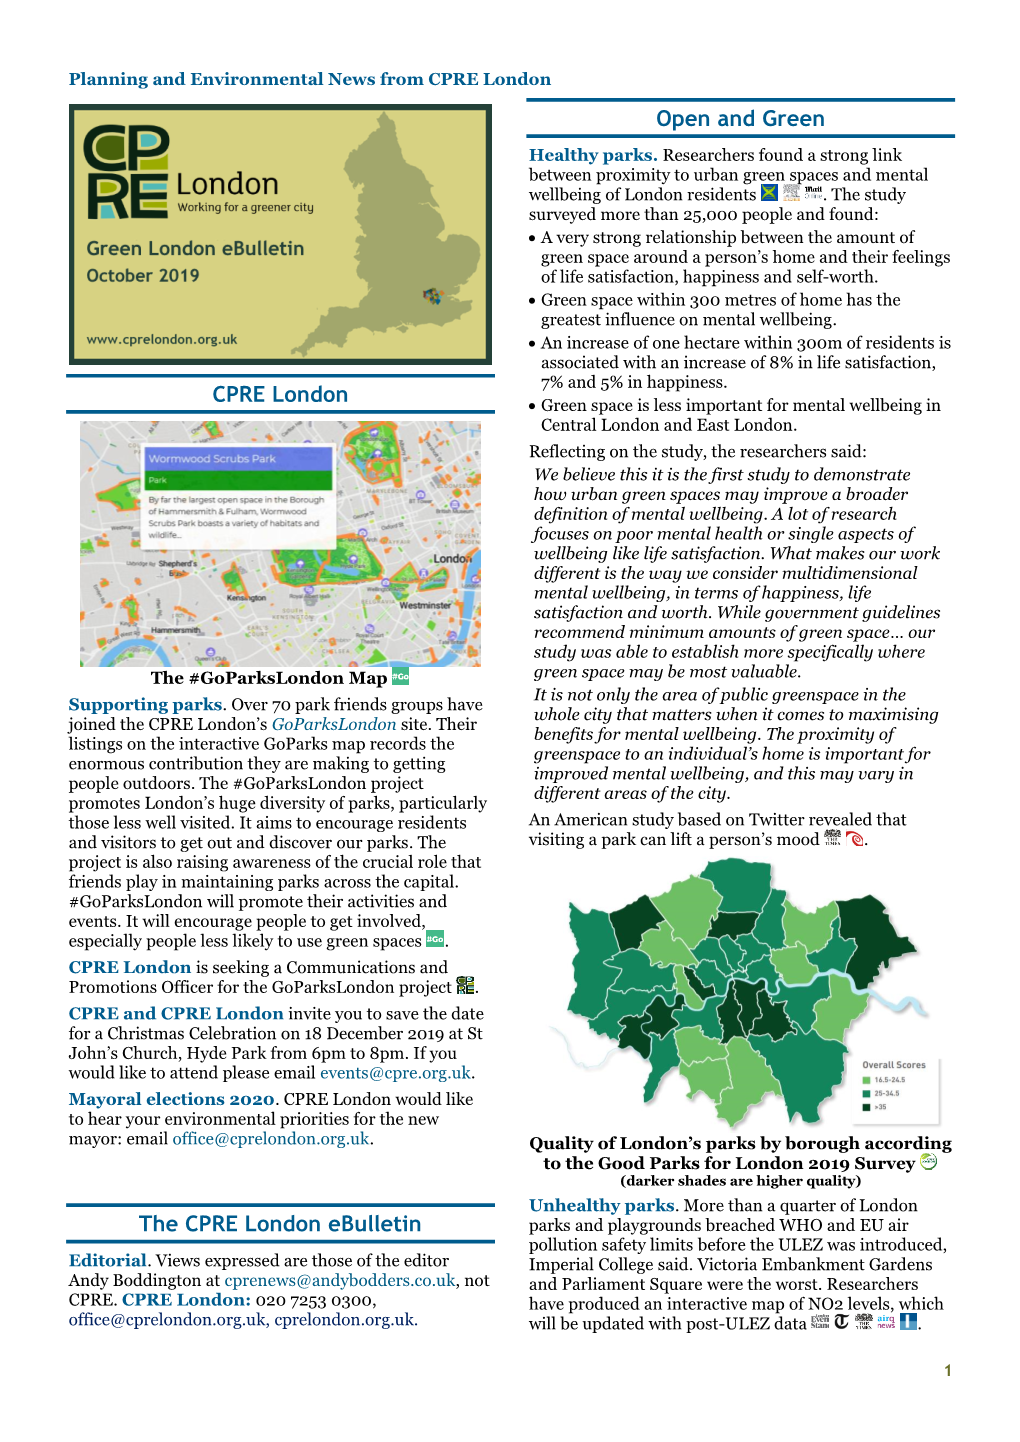 CPRE London Ebulletin Parks and Playgrounds Breached WHO and EU Air Pollution Safety Limits Before the ULEZ Was Introduced, Editorial